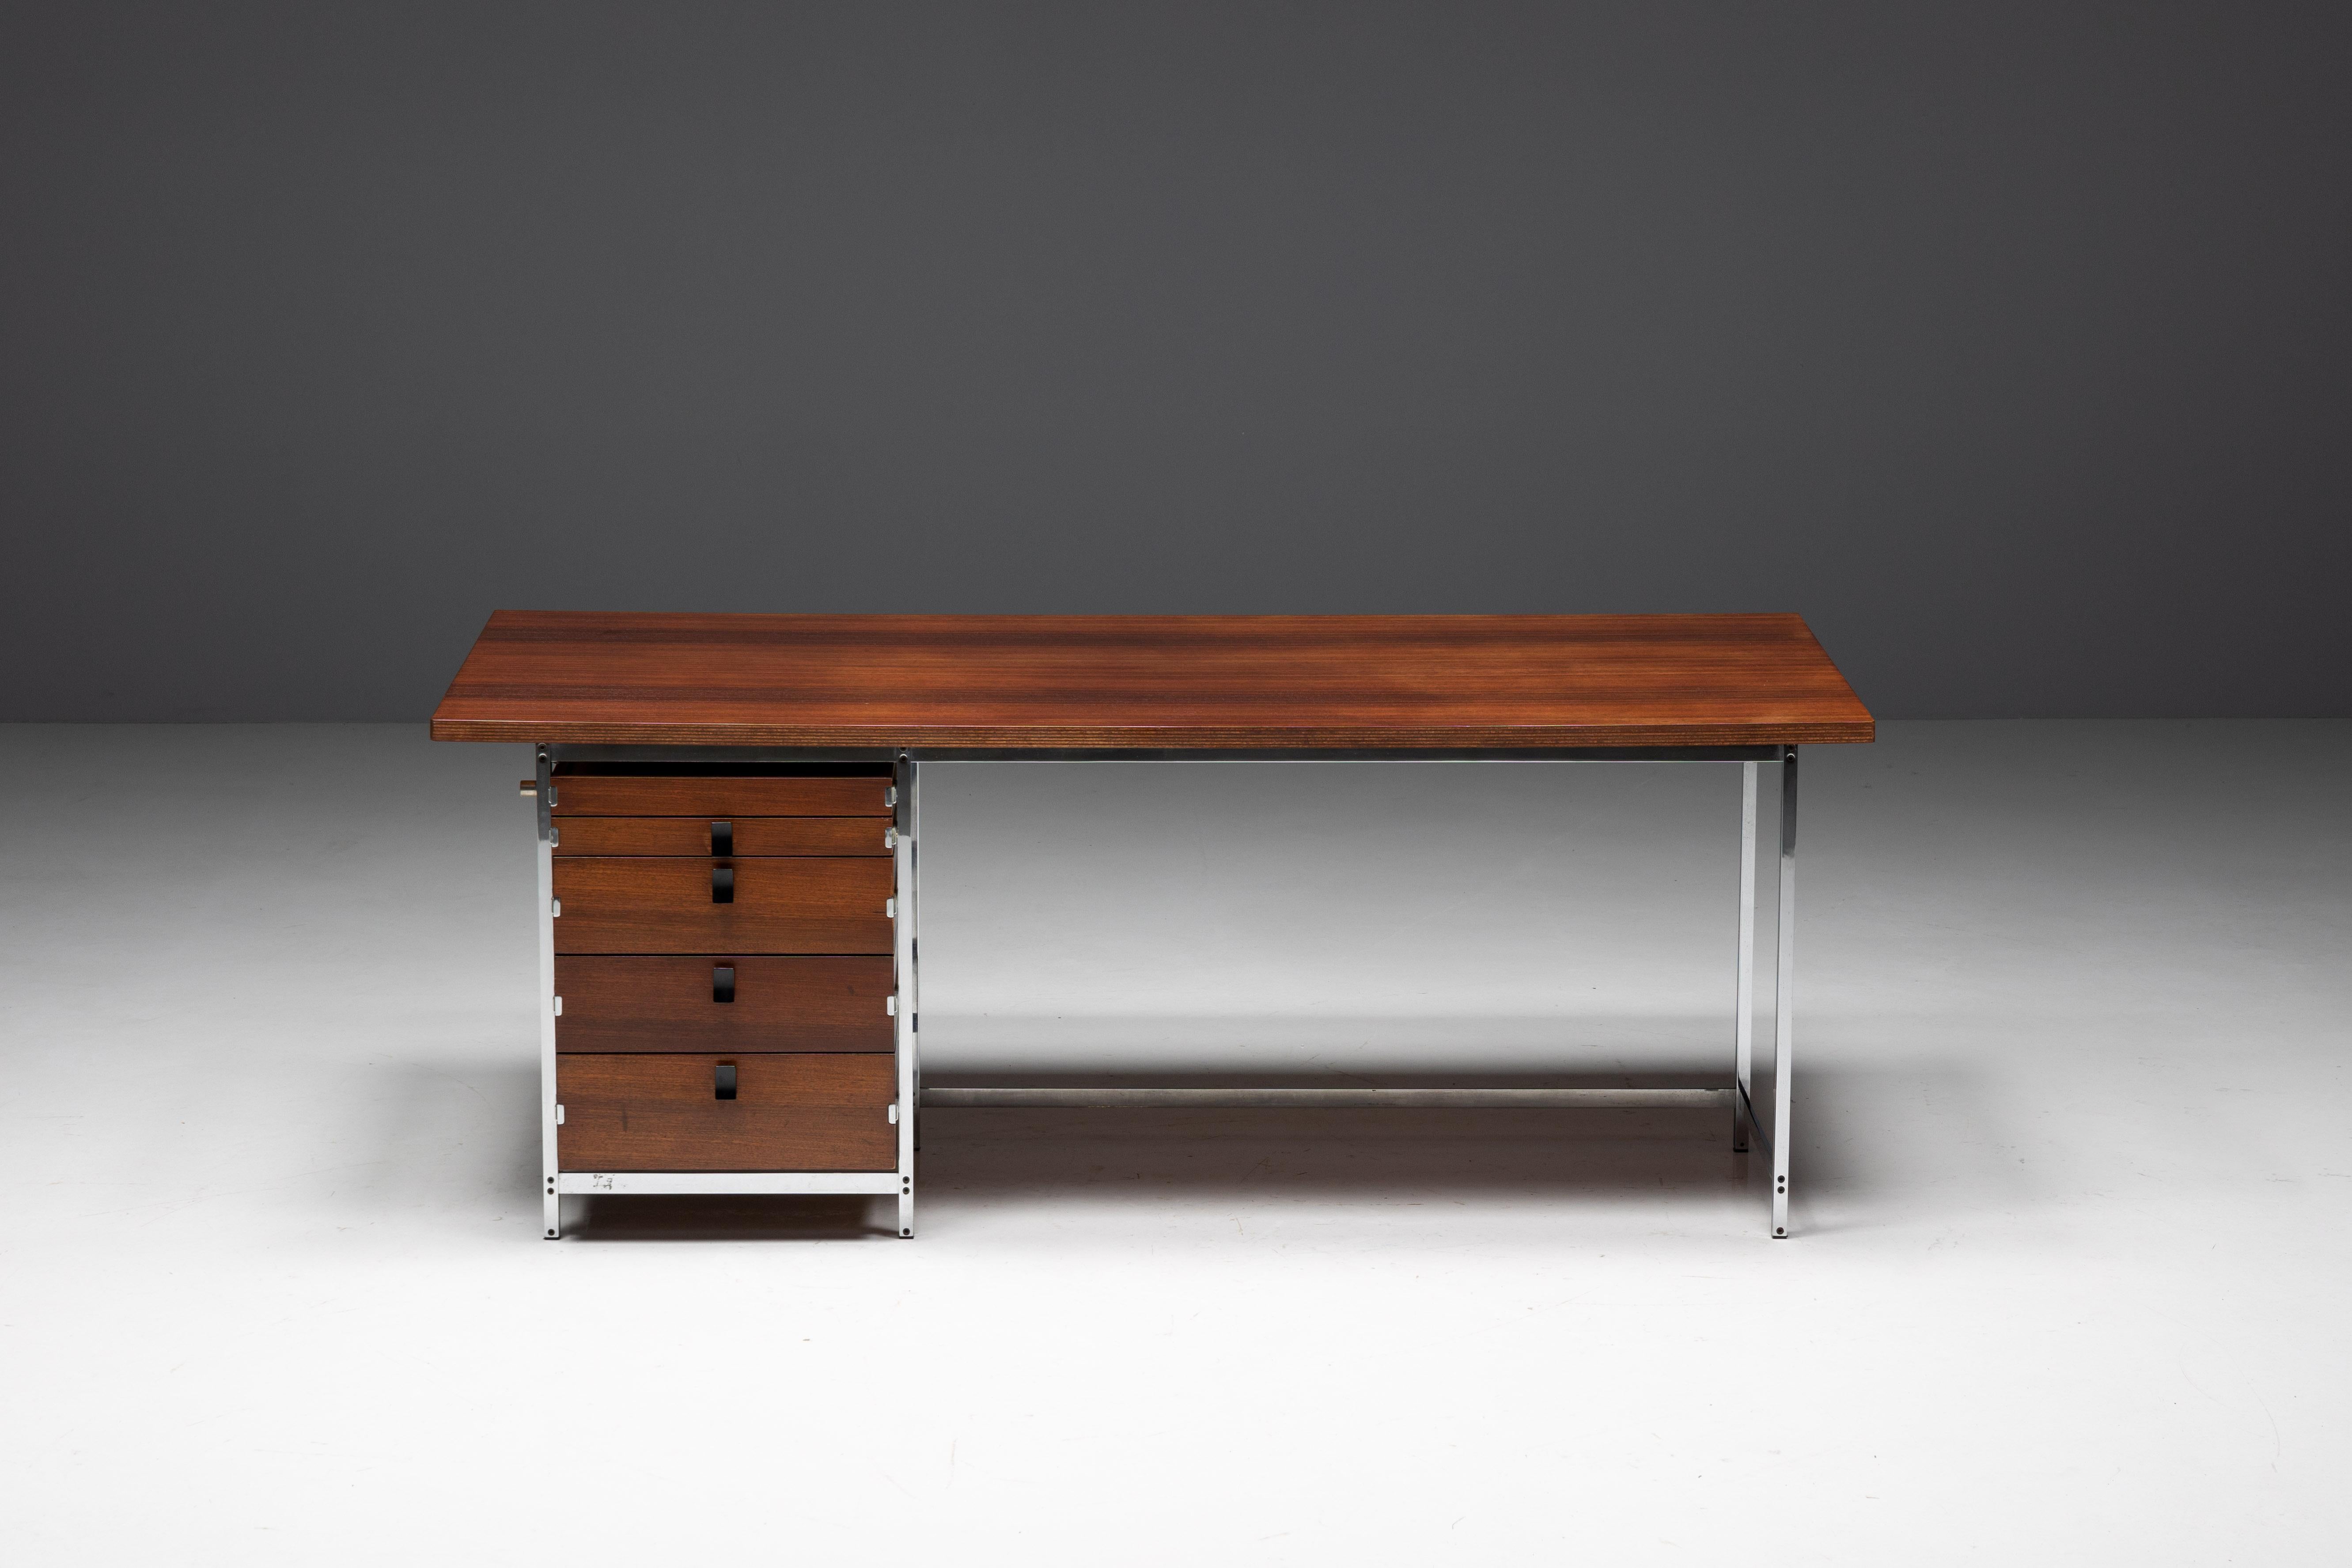 Executive desk designed by Jules Wabbes and manufactured by Mobilier Universel in the 1960s. This exclusive desk bears the hallmark of Jules Wabbes, a celebrated Belgian furniture designer and interior architect. Originally conceived for the